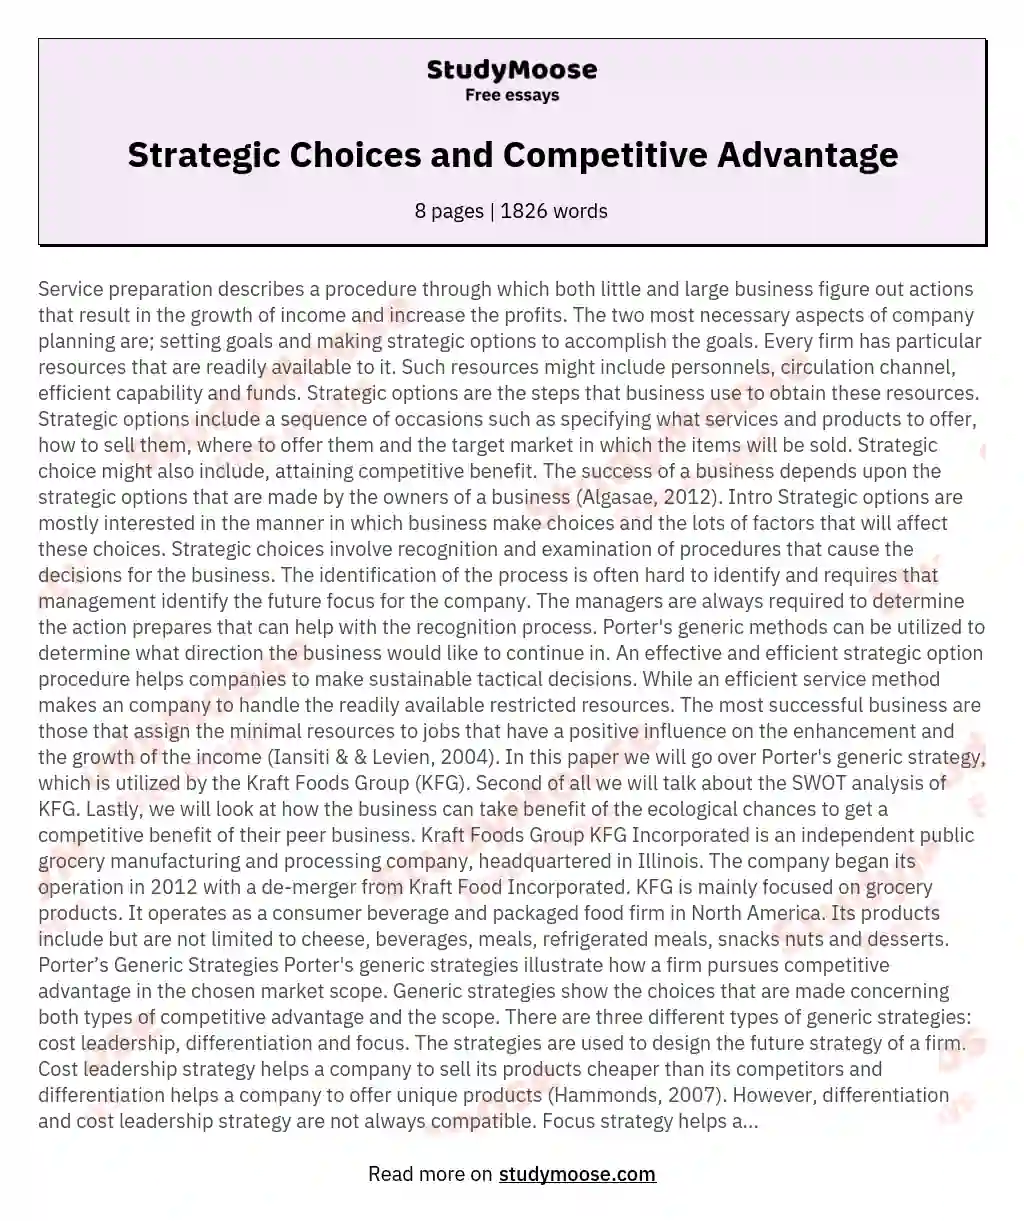 Strategic Choices and Competitive Advantage essay